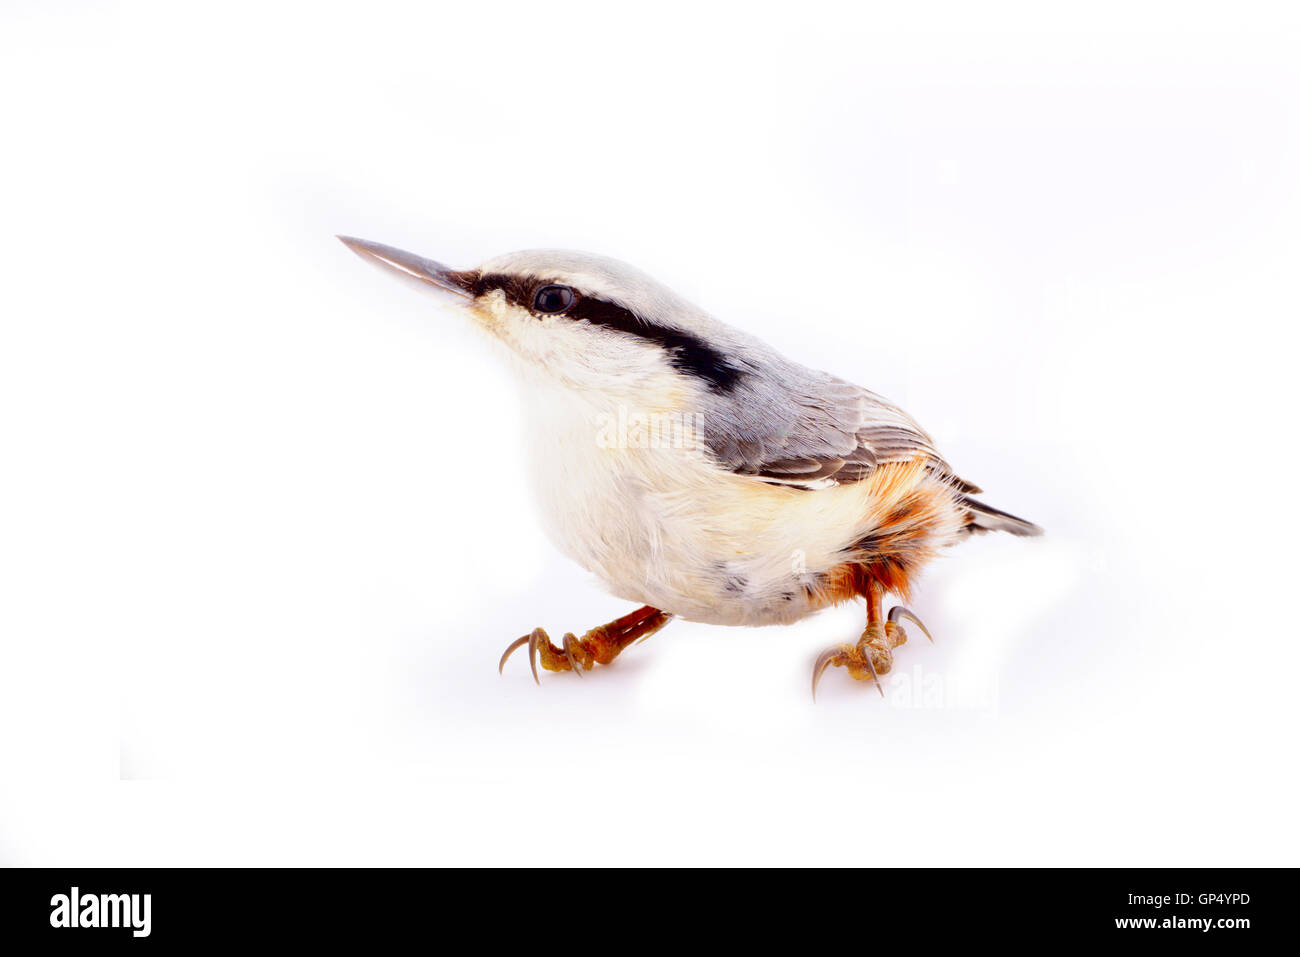 European bird nuthatch isolated on white close up Stock Photo